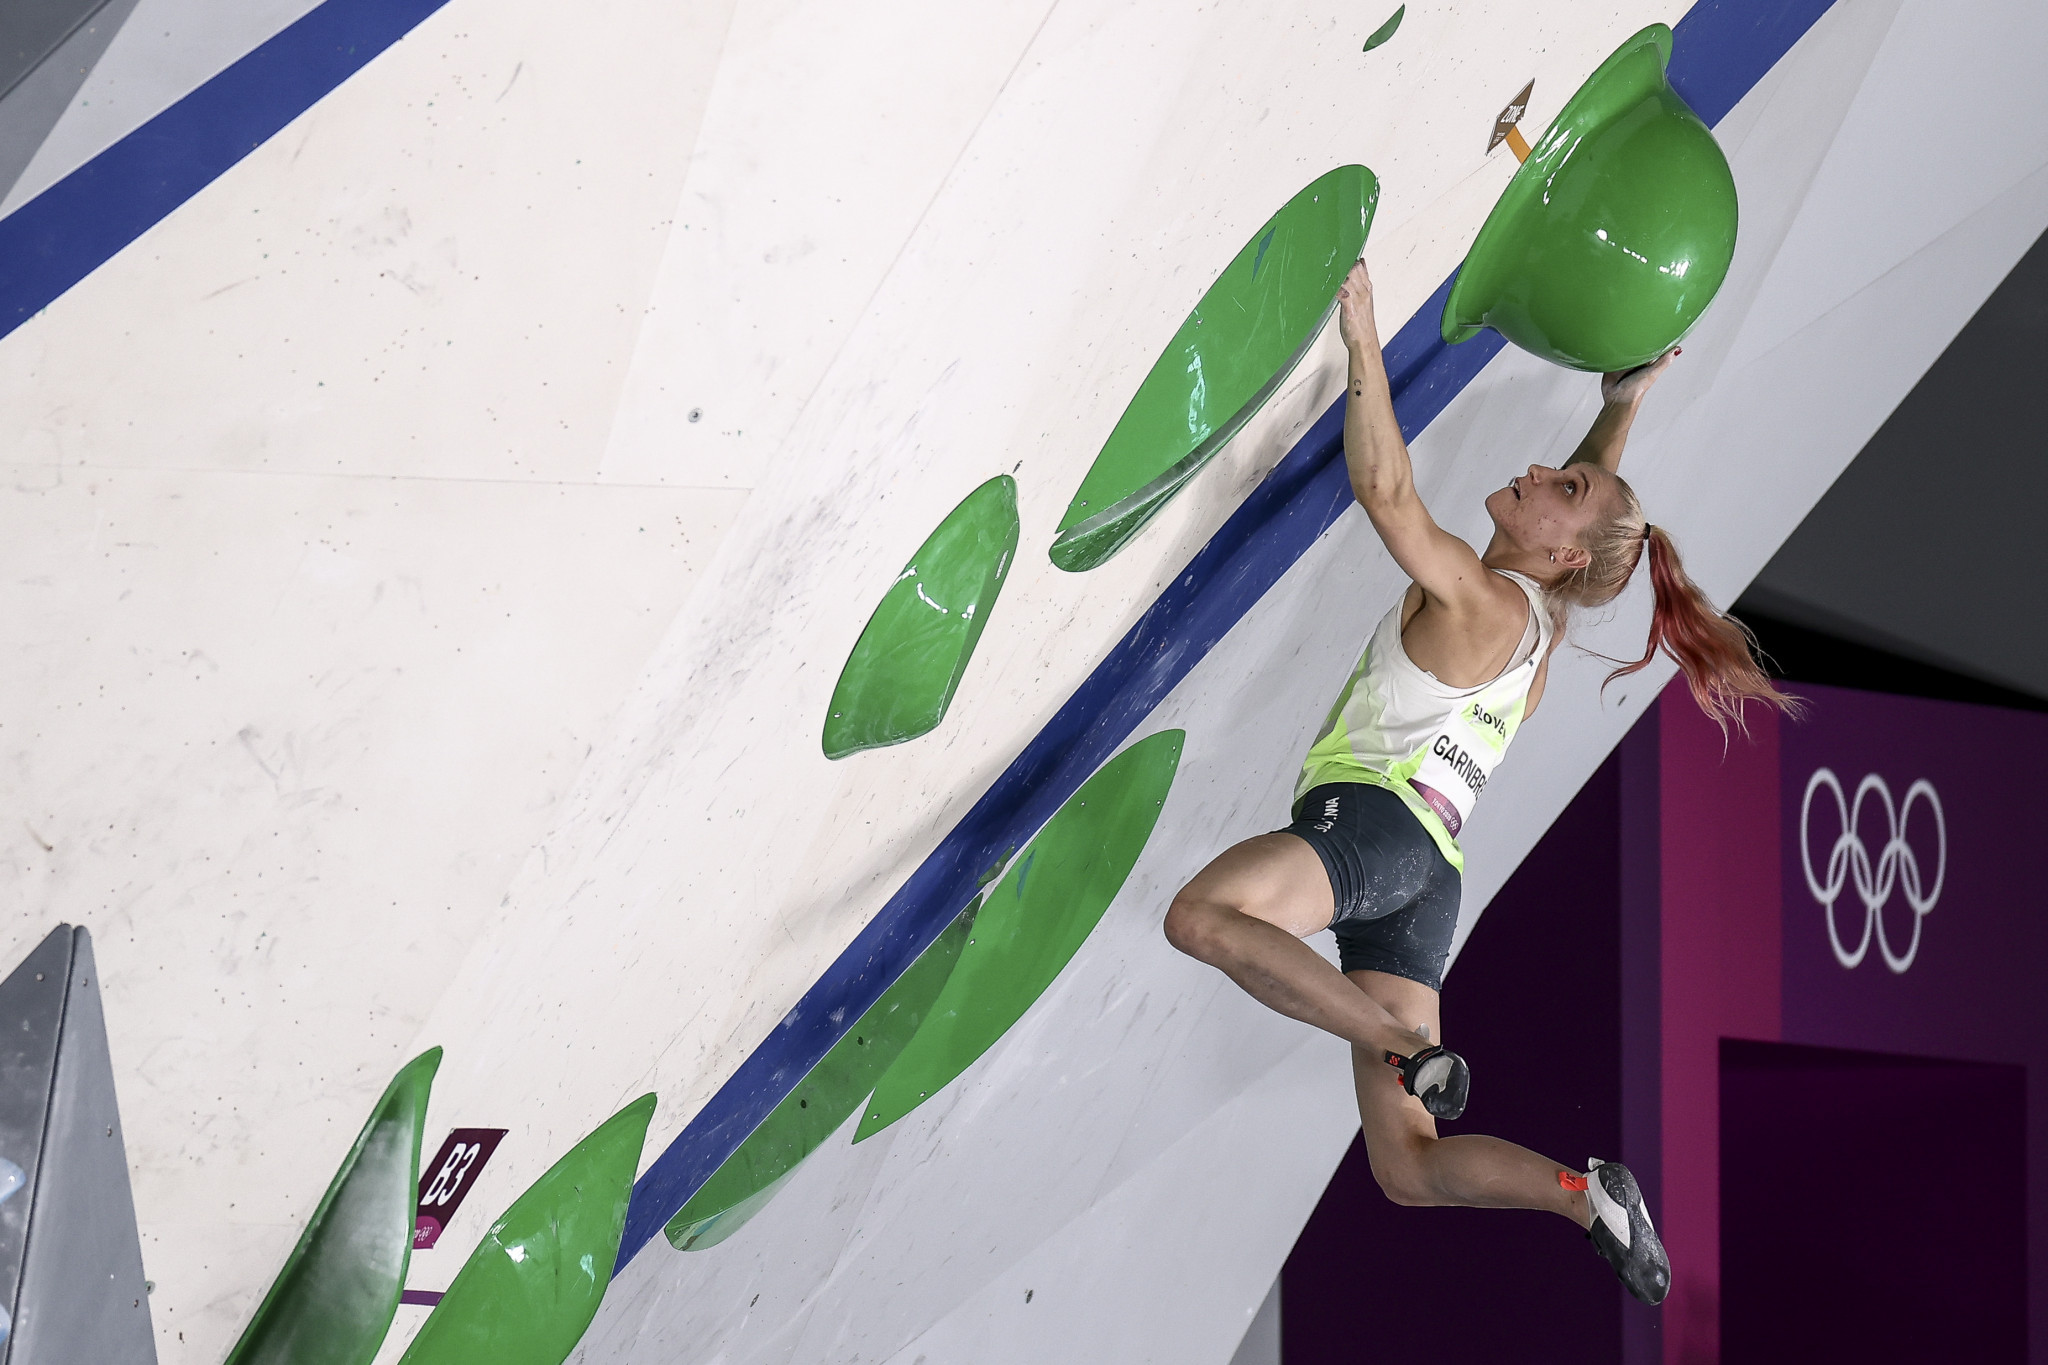 Sport climbing has been awarded two extra medal events for Paris 2024 ©Getty Images